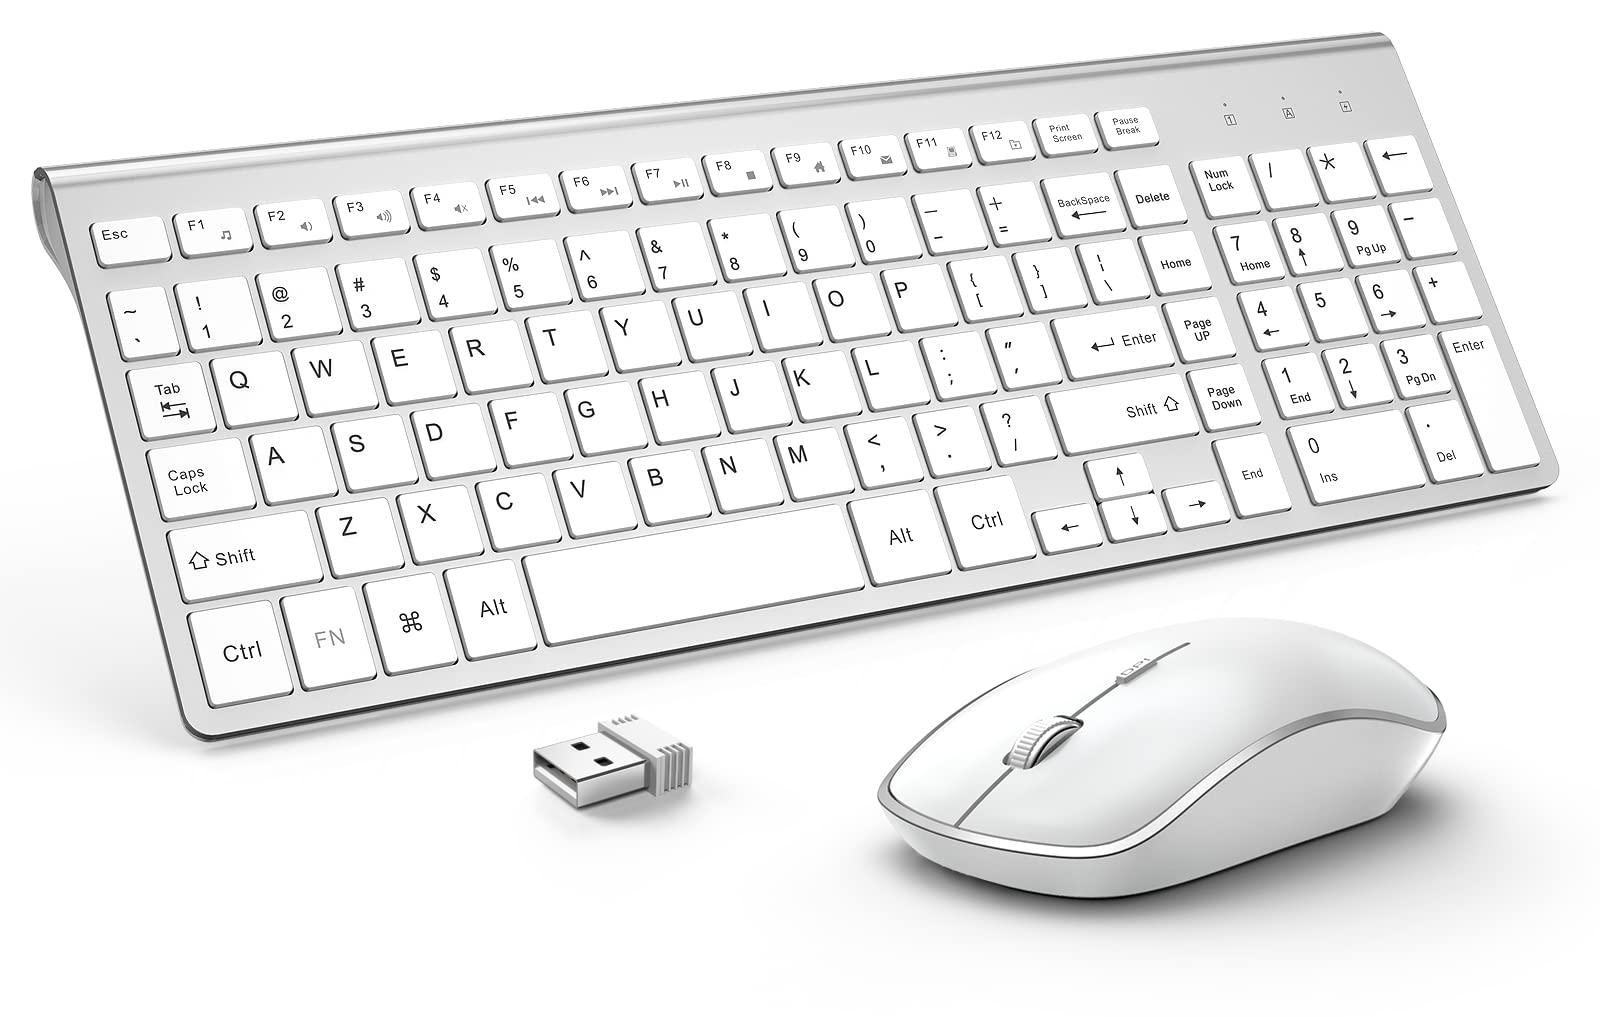 Wireless Keyboard and Mouse, J JOYACCESS USB Slim Wireless Keyboard Mouse with Numeric Keypad Compatible with iMac Mac PC Laptop Tablet Computer Windows (Silver White)Rechargeable Wireless Keyboard and Mouse Combo- J JOYACCESS 2.4G Full Size Portable Keyboard and Mouse Ergonomic, Quiet Click Compact Design for Laptop,PC,Desktop,Computer,Windows- Black
